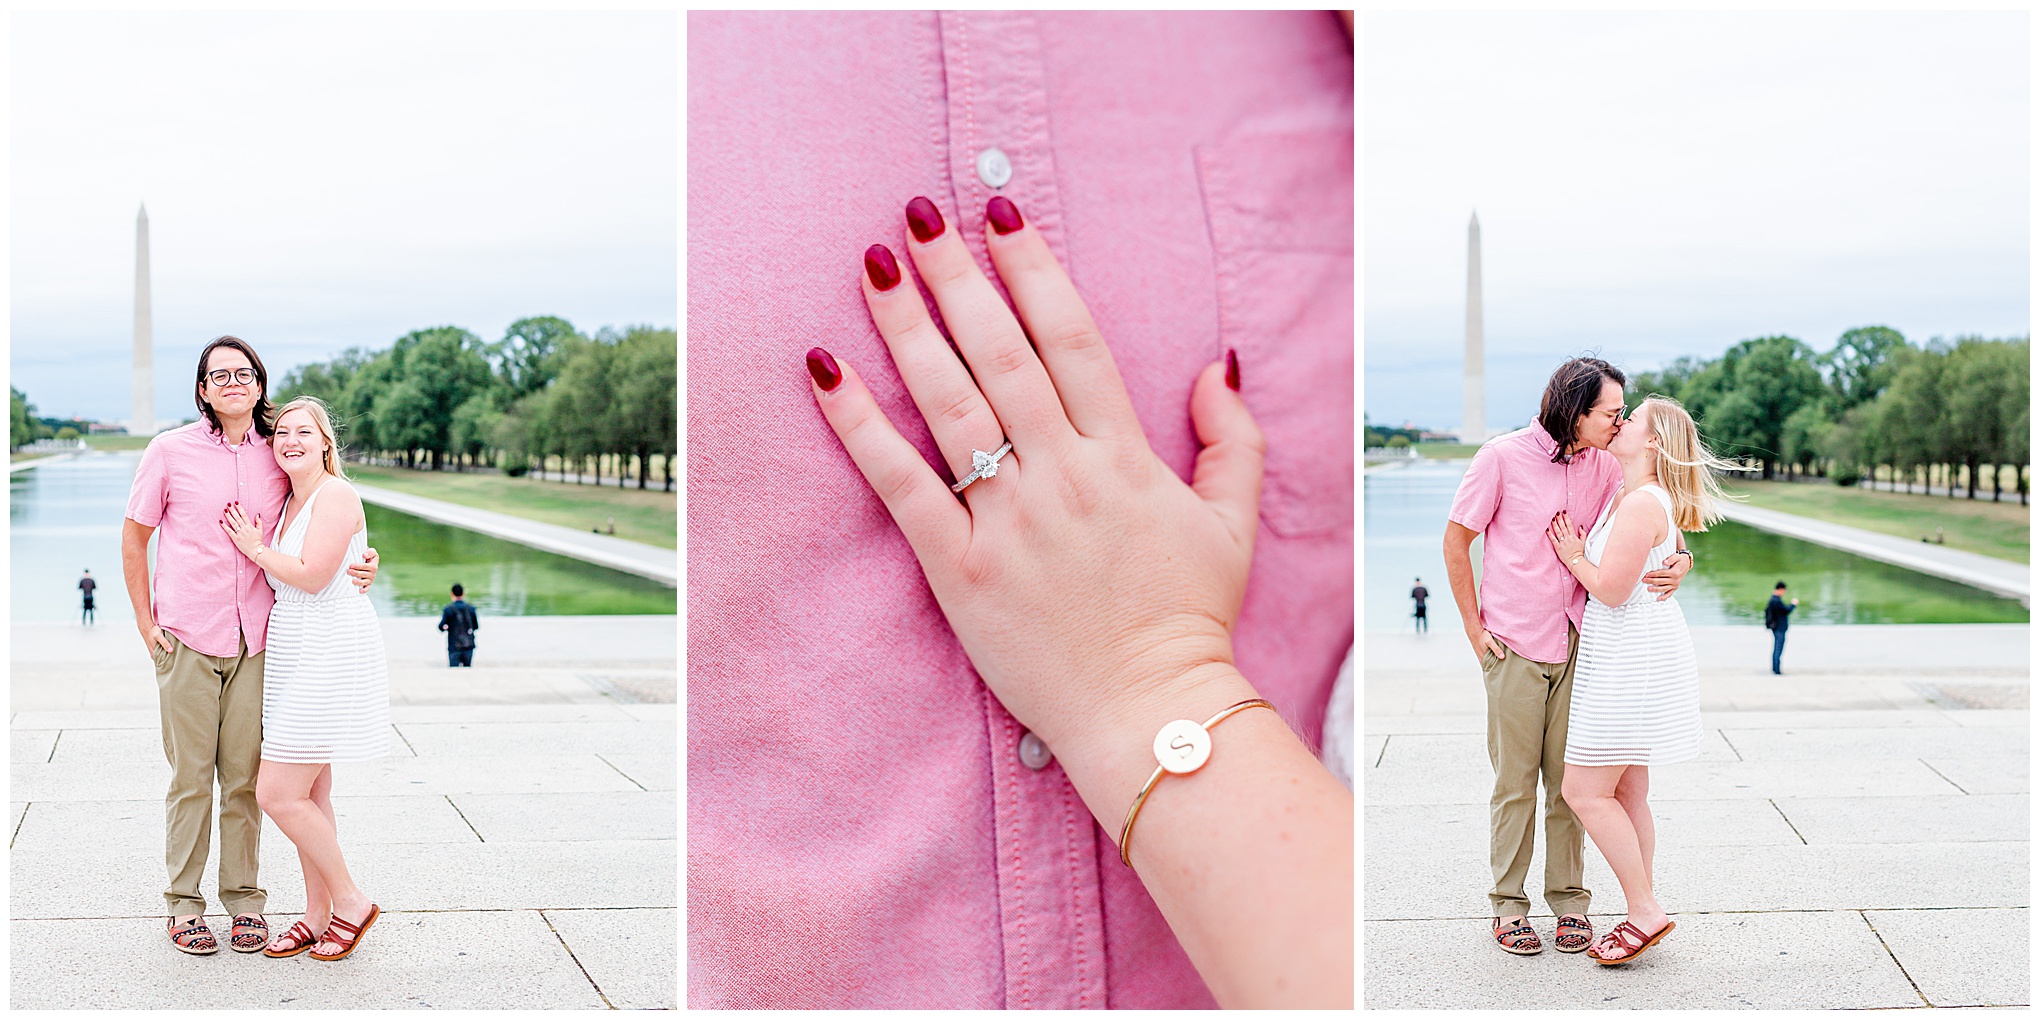 Lincoln Memorial suprise proposal, National Mall proposal, reflecting pool, Lincoln Memorial portraits, National Mall portraits, engagement photos, proposal portraits, surprise proposal photos, Rachel E.H. Photography, D.C. portraits, Virginia wedding photographer, Maryland wedding photographer, Baltimore wedding photographer, D.C. wedding photographer, engagement ring, cranberry nails